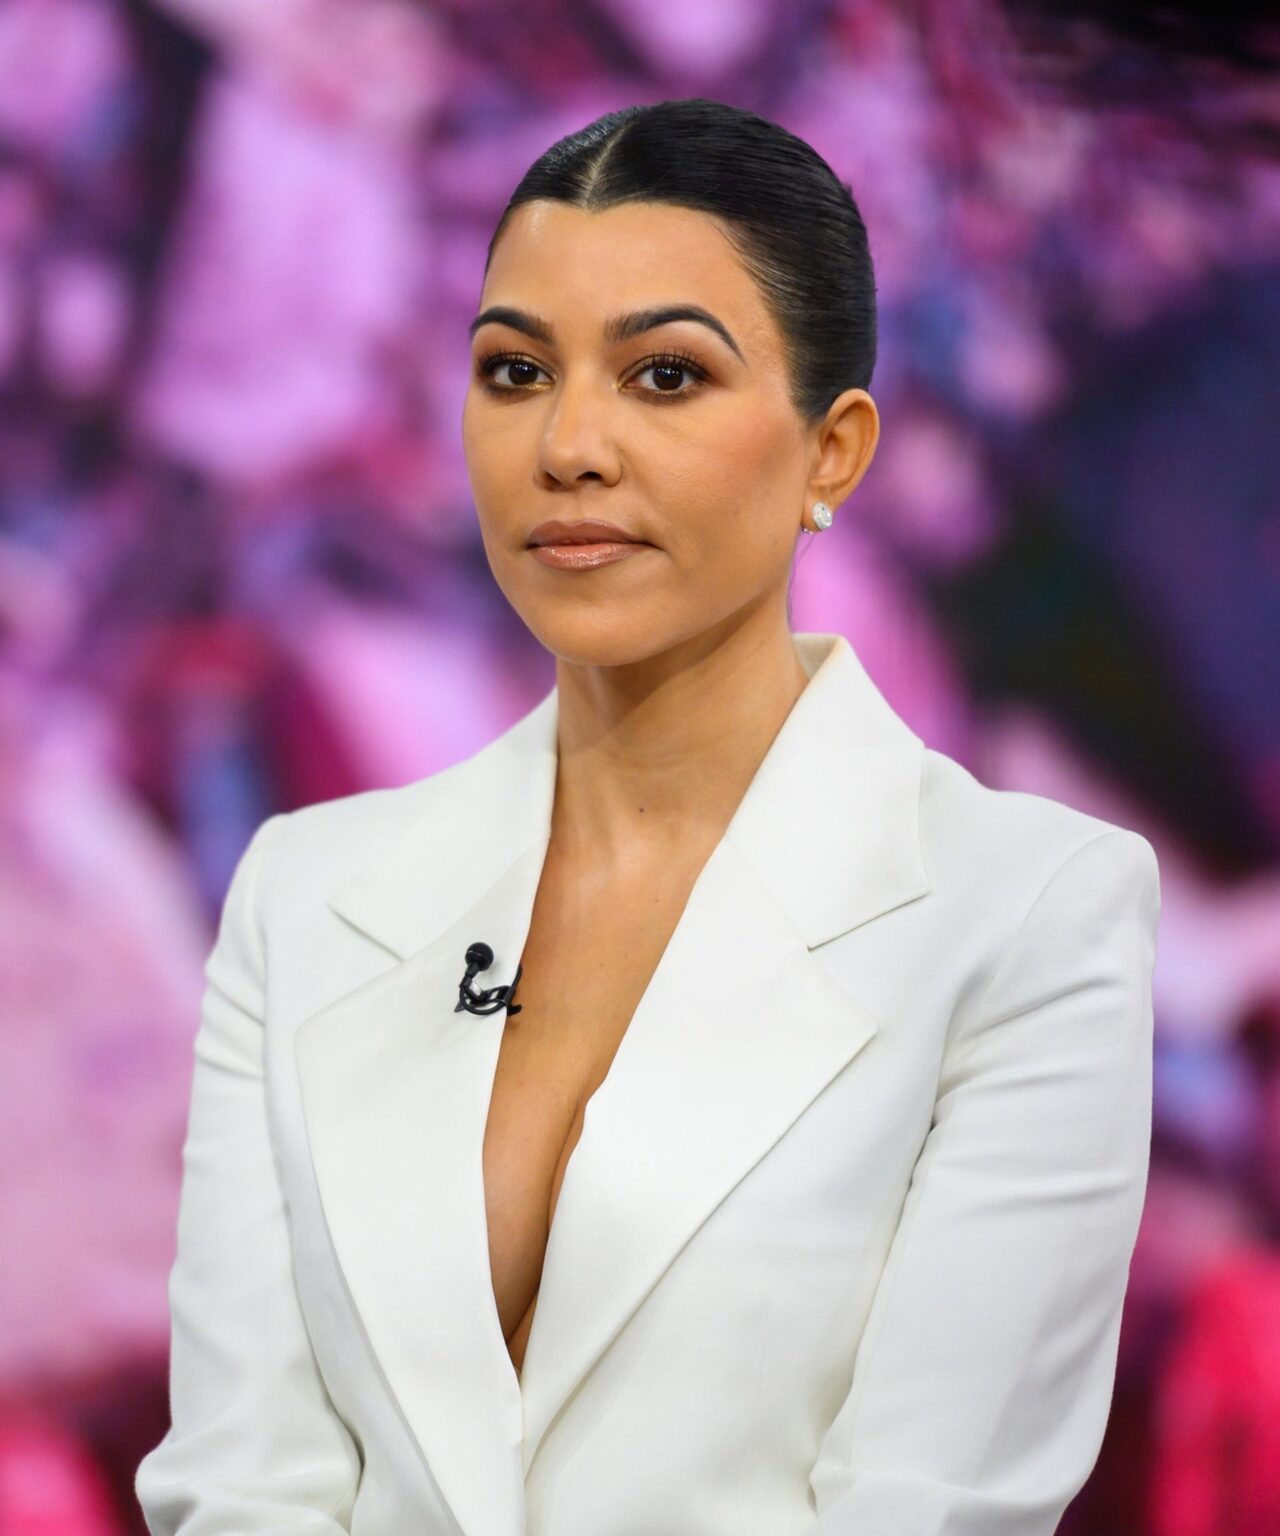 The iconic reality TV show 'Keeping Up With the Kardashians' ended. Why is Instagram dragging Kourtney Kardashian now?